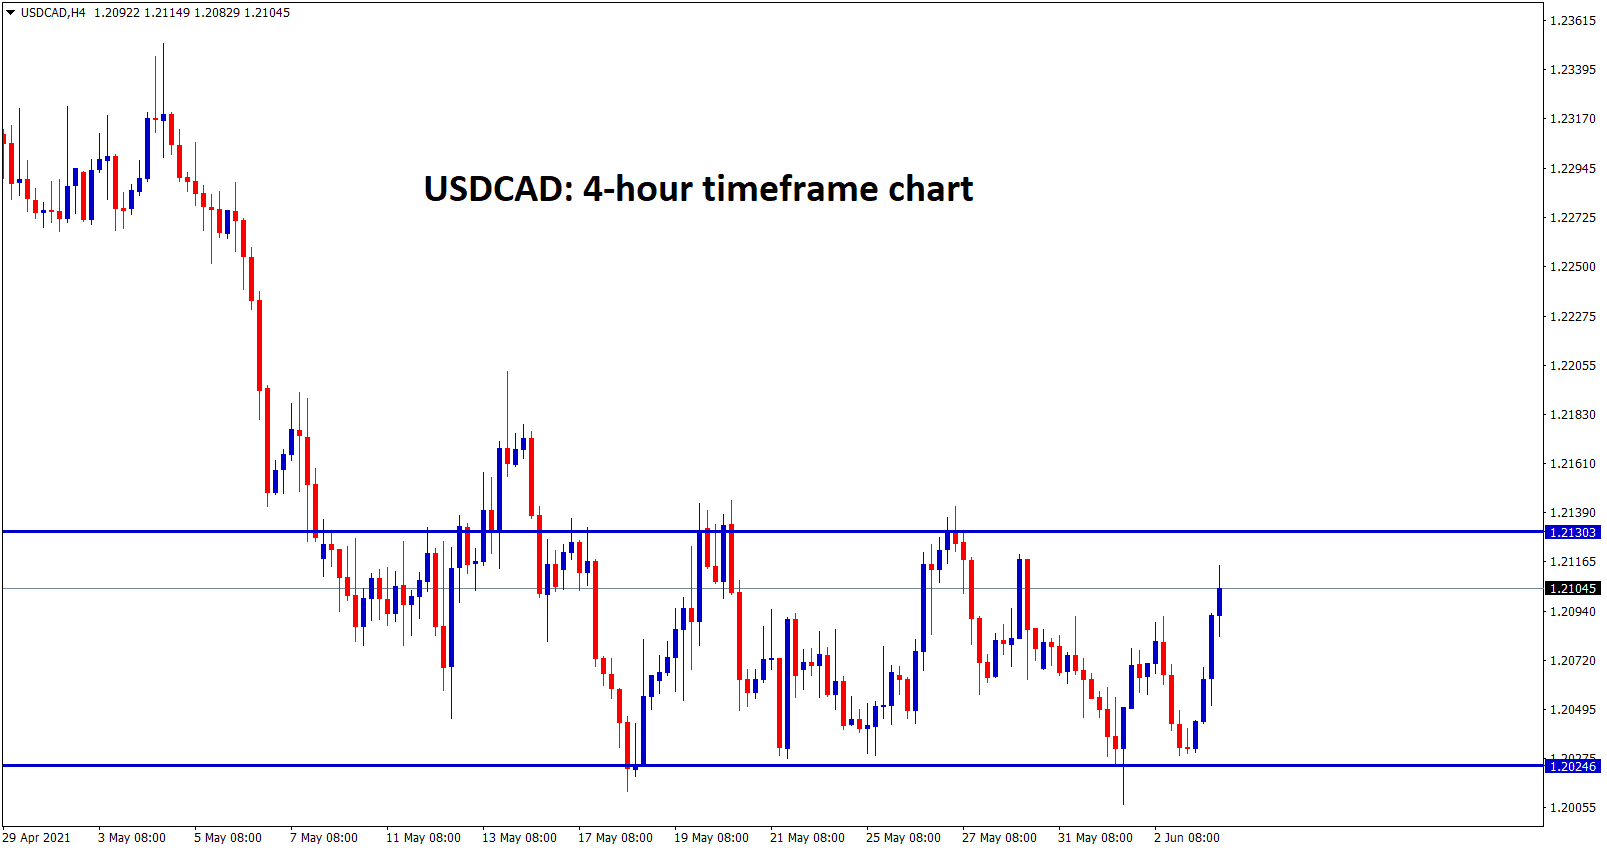 USDCAD ranging up and down between resistance and support level